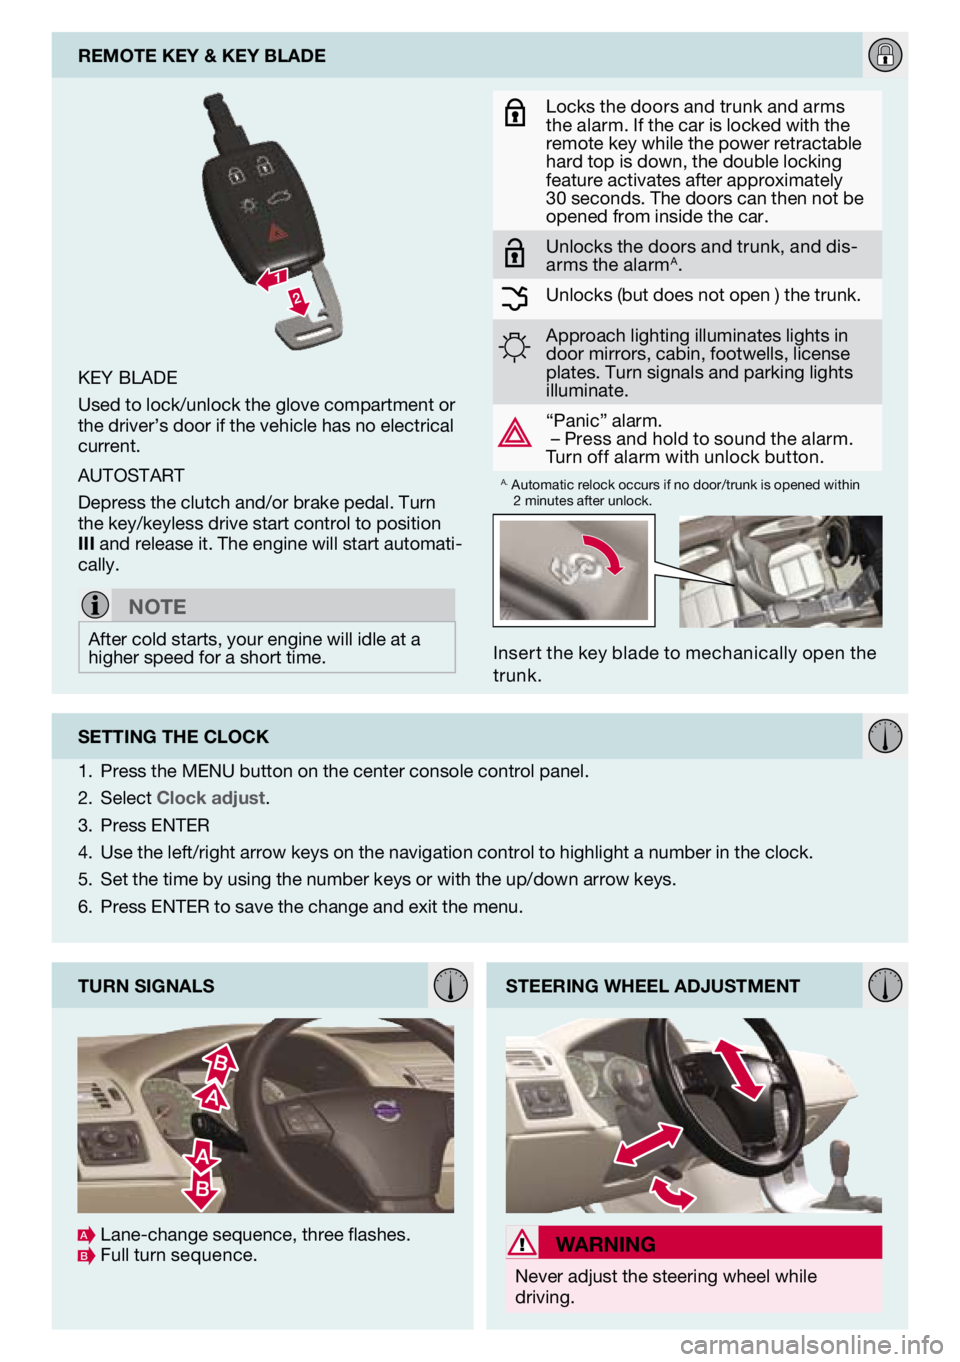 VOLVO C70 2011  Quick Guide 
Inser t the key blade to mechanically open the trunk.
key blade
Used to lock/unlock the glove compartment or the driver’s door if the vehicle has no electrical current.
aUtostart
depress the clutch